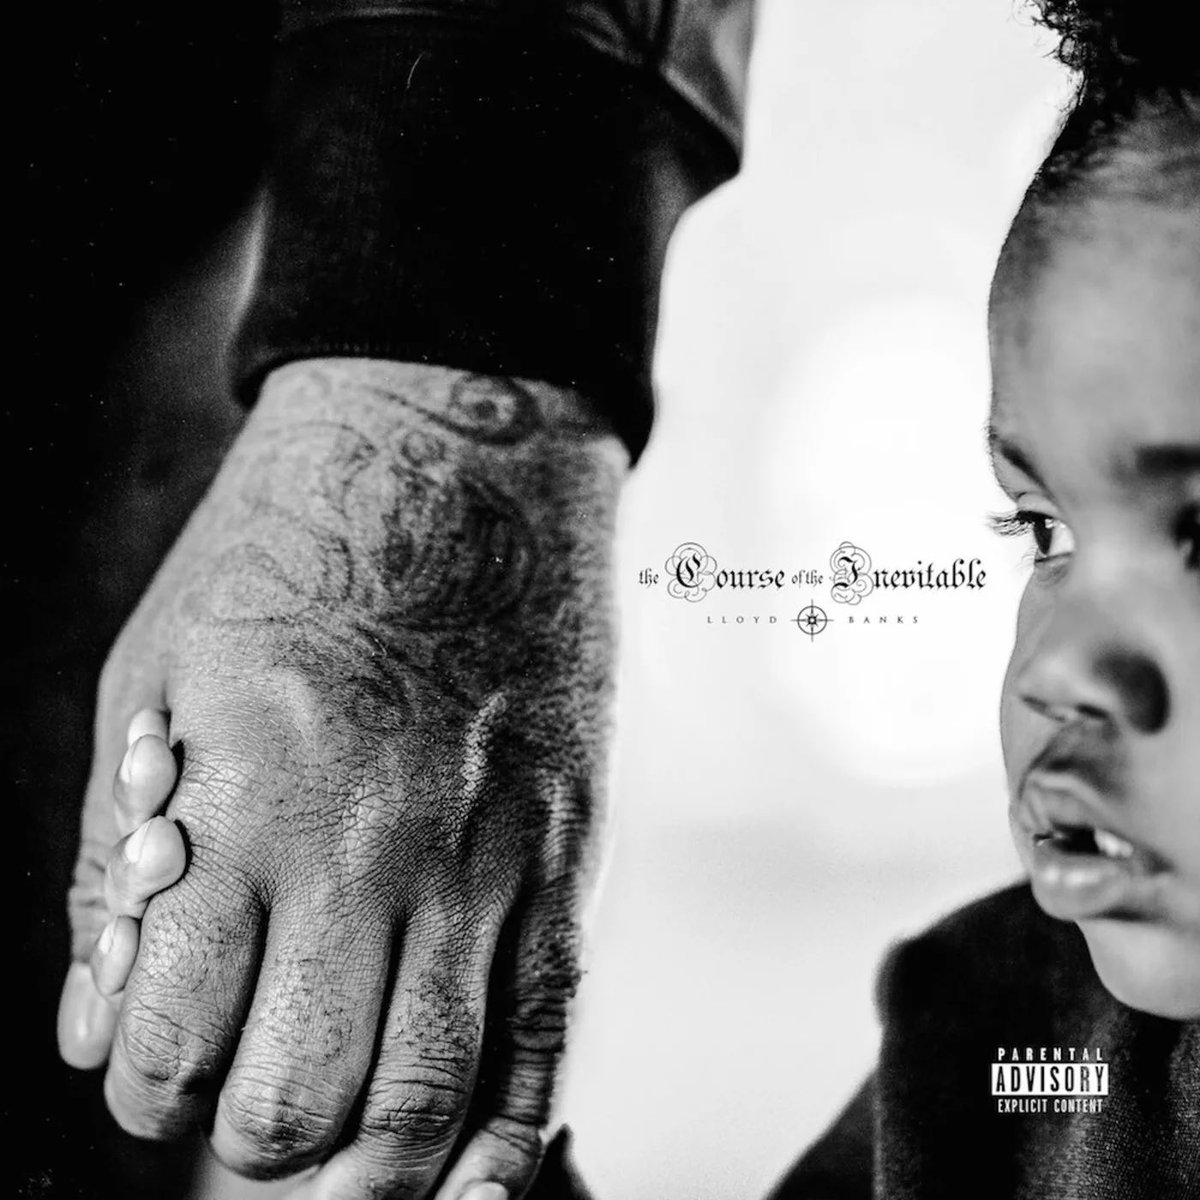 June 4, 2021 @Lloydbanks released The Course of the Inevitable Some Production Includes @encornelious @cartunebeatz @Rxnwayofficial @The_Olympicks @ChaseNCashe and more Some Features Include @BennyBsf @VADO_MH @FreddieGibbs @SyAriNotSorry @rocmarci @stylesp and more